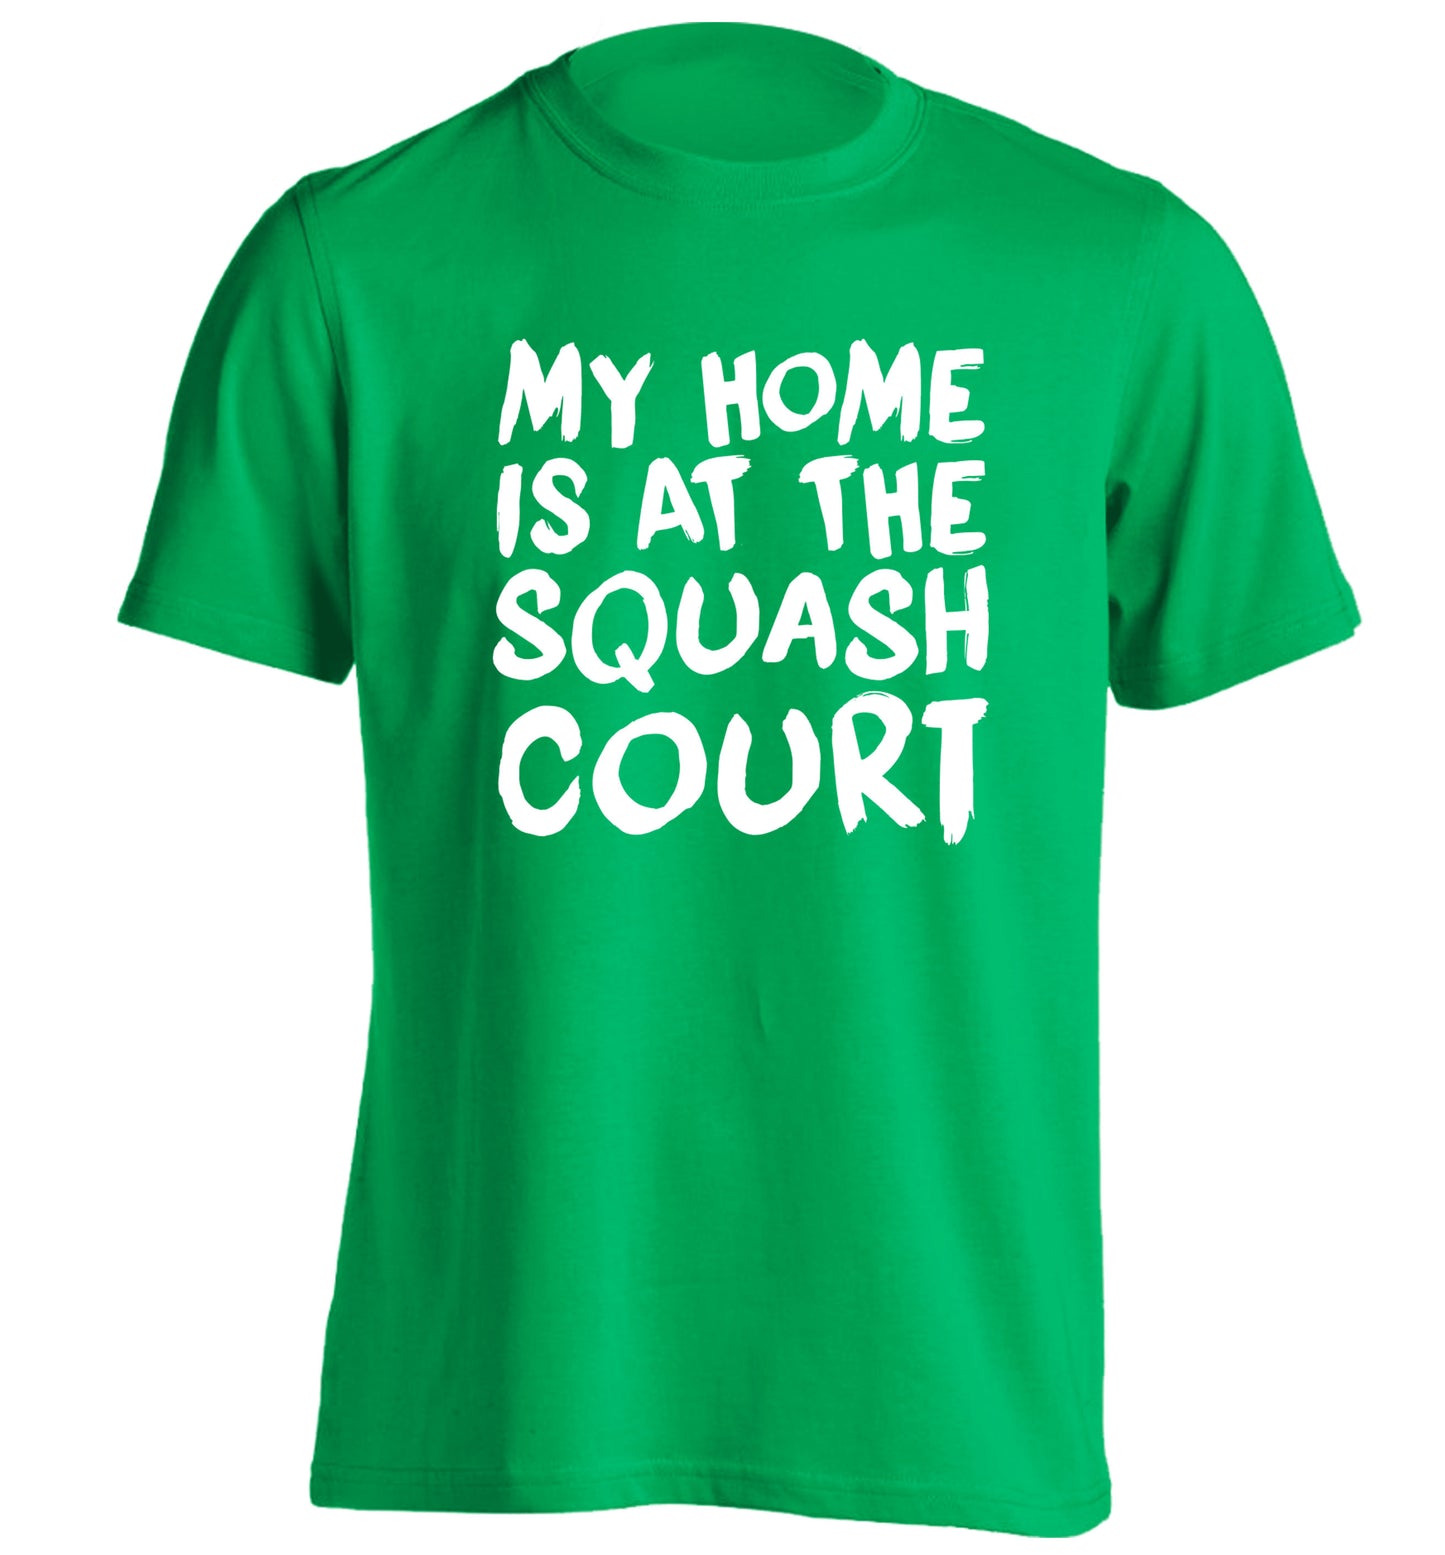 My home is at the squash court adults unisex green Tshirt 2XL